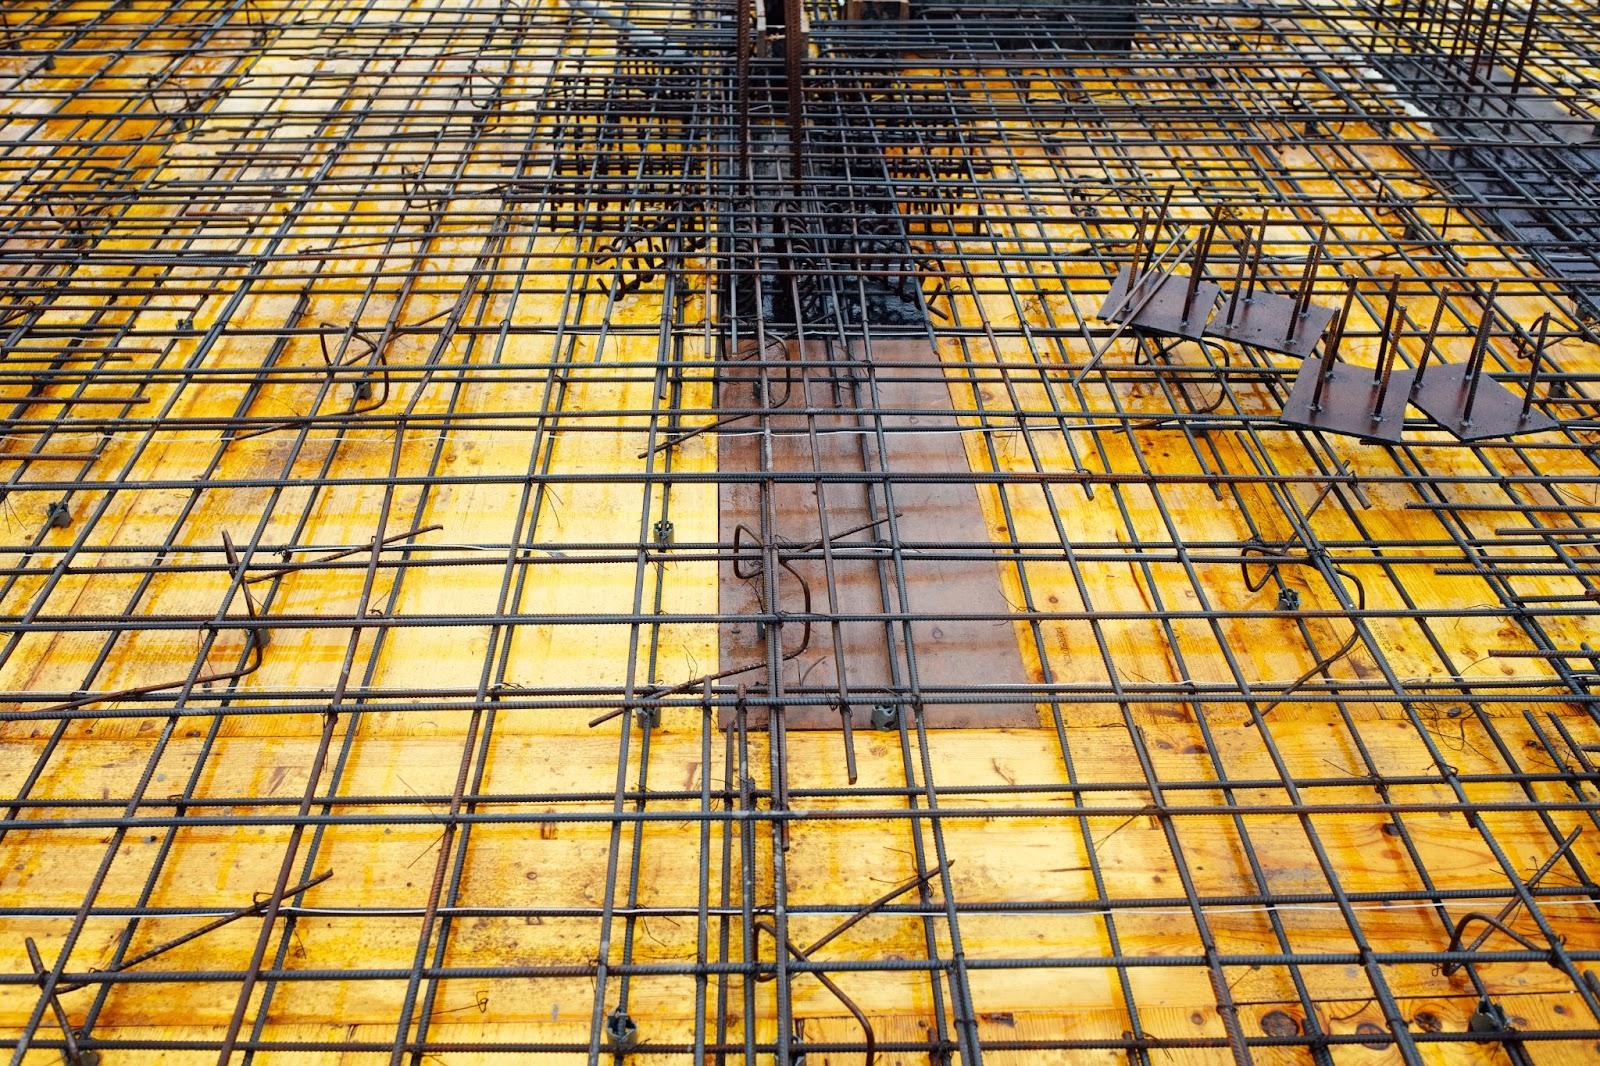 A construction site shows a yellow vapor barrier installed for use under concrete slabs.